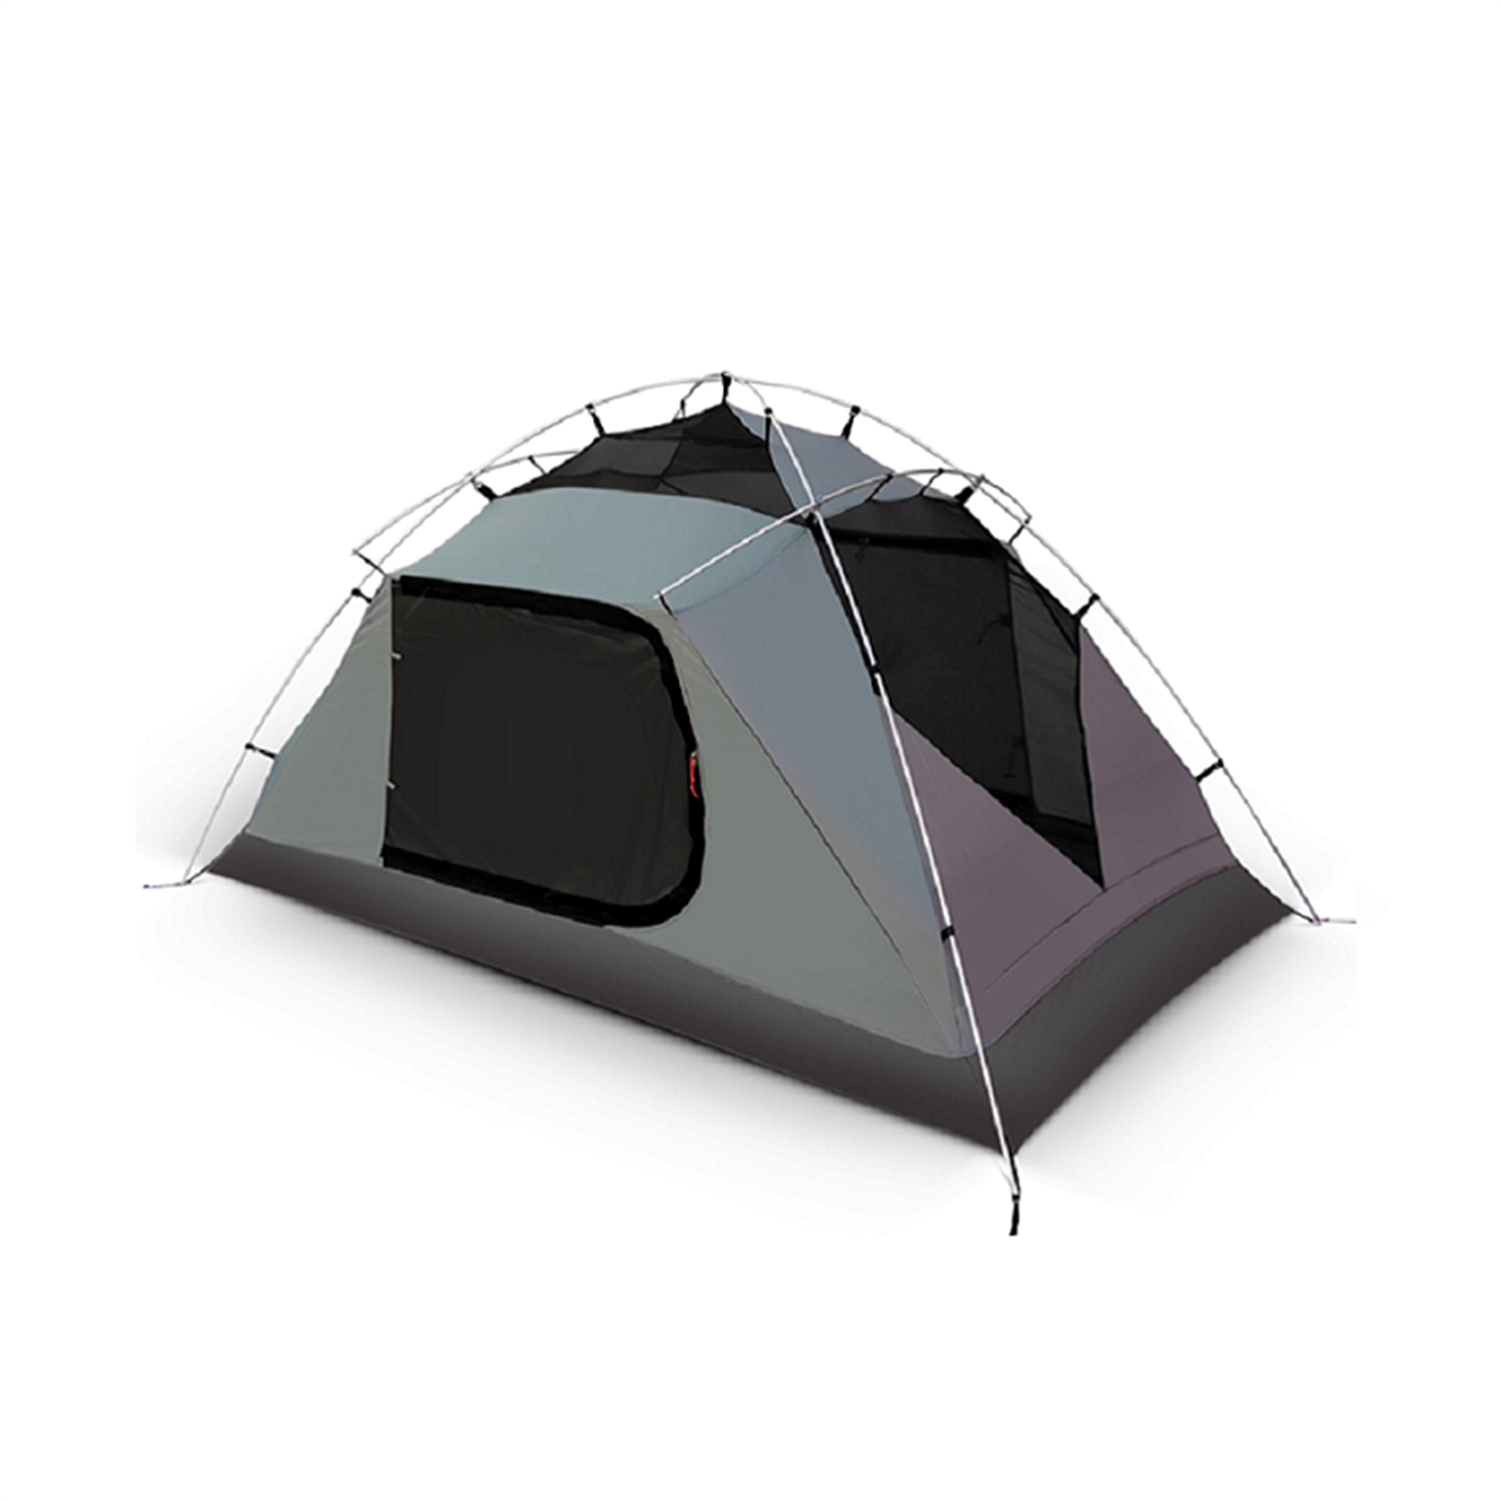 Intents Outdoors Titan 2 - 3.3kg 'All Weather Series' 2 Person Tent